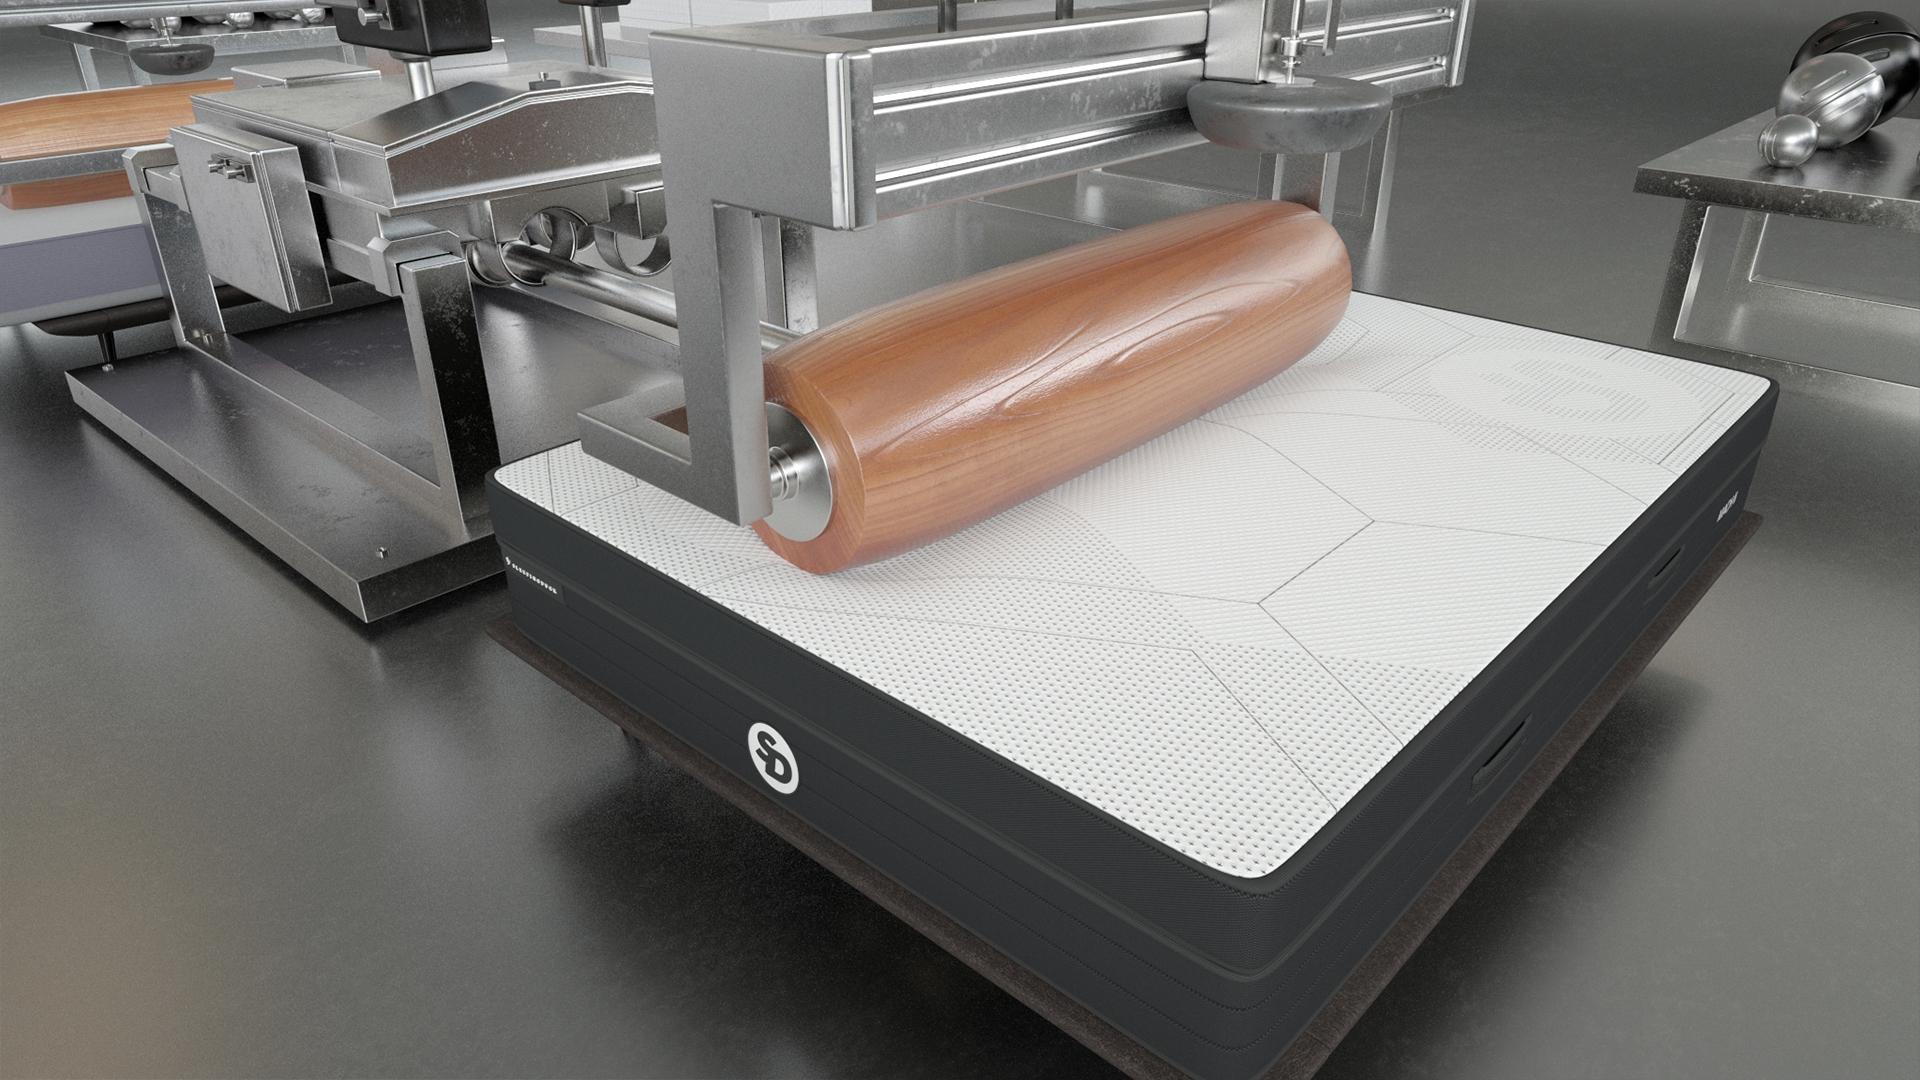 A simulation of the SD Mach 2 Mattress being tested by a large wooden roller for longevity.